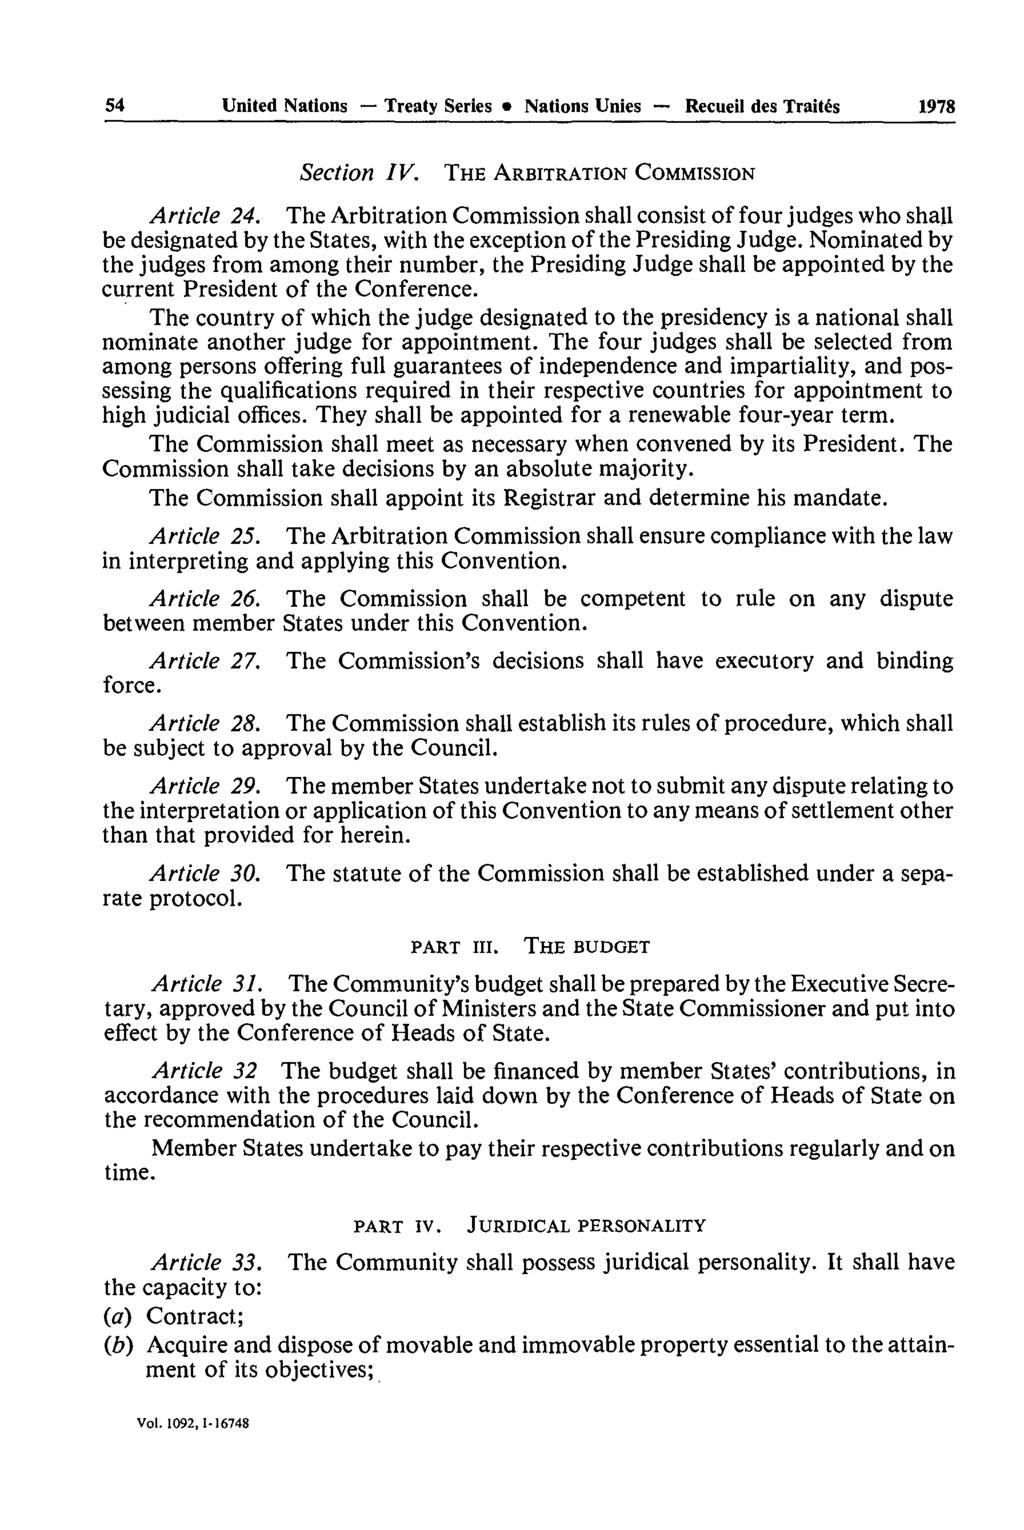 54 United Nations Treaty Series Nations Unies Recueil des Traités 1978 Section IV. THE ARBITRATION COMMISSION Article 24.